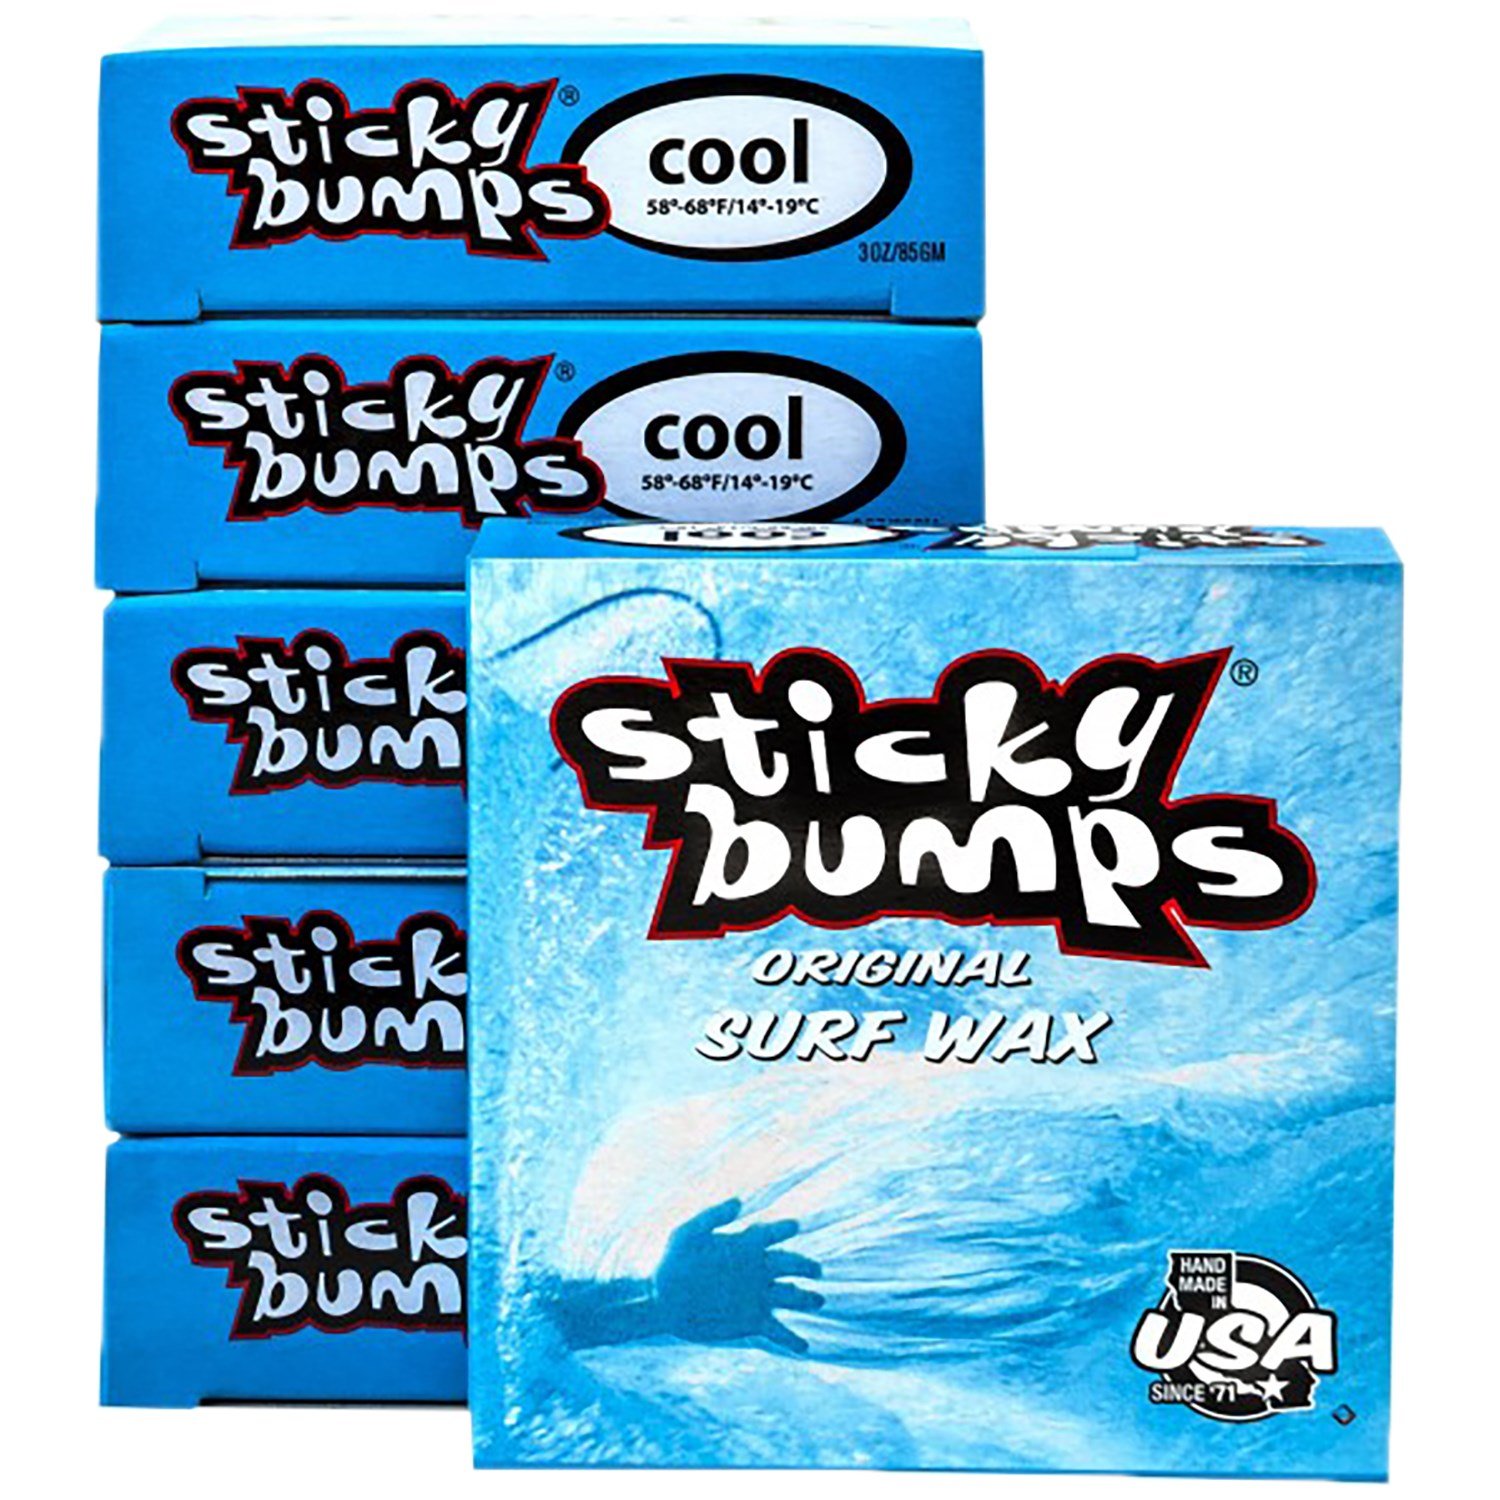 Sticky Bumps Surf Wax Cool Water NEW 4 Block Pack 